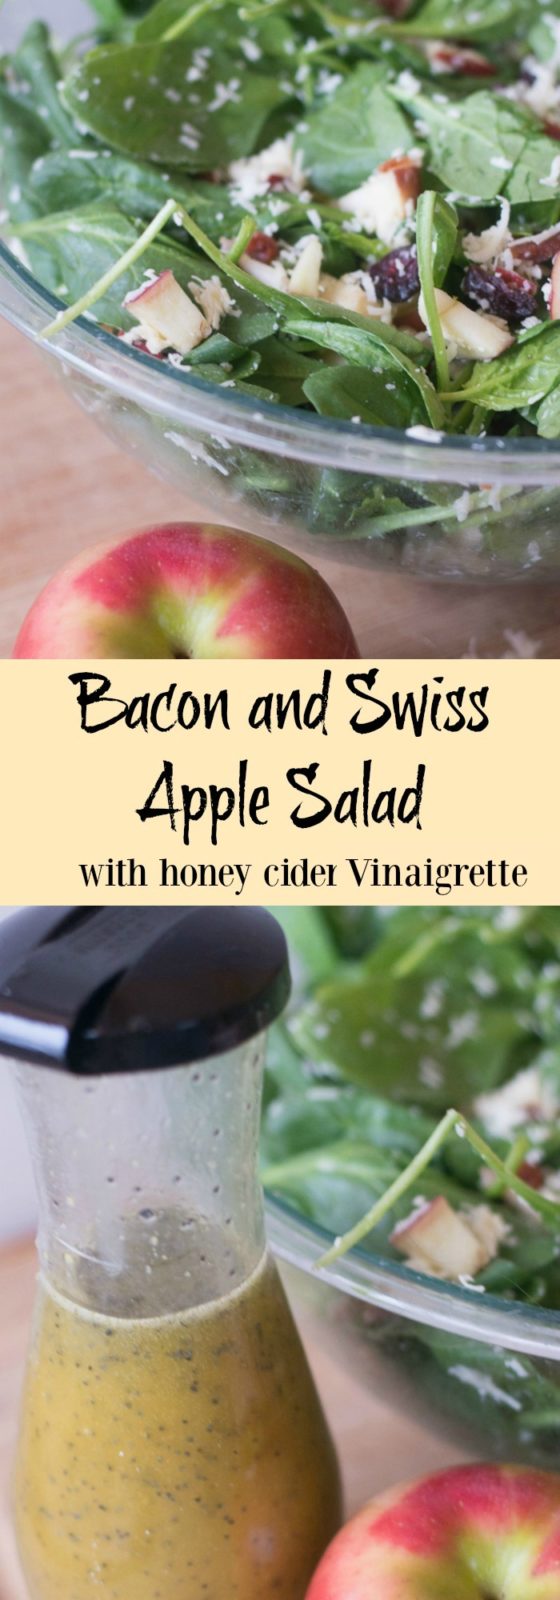 This was a HUGE hit when I brought it to a party - a bacon and swiss apple cider with a tangy honey cider vinaigrette. So tasty!